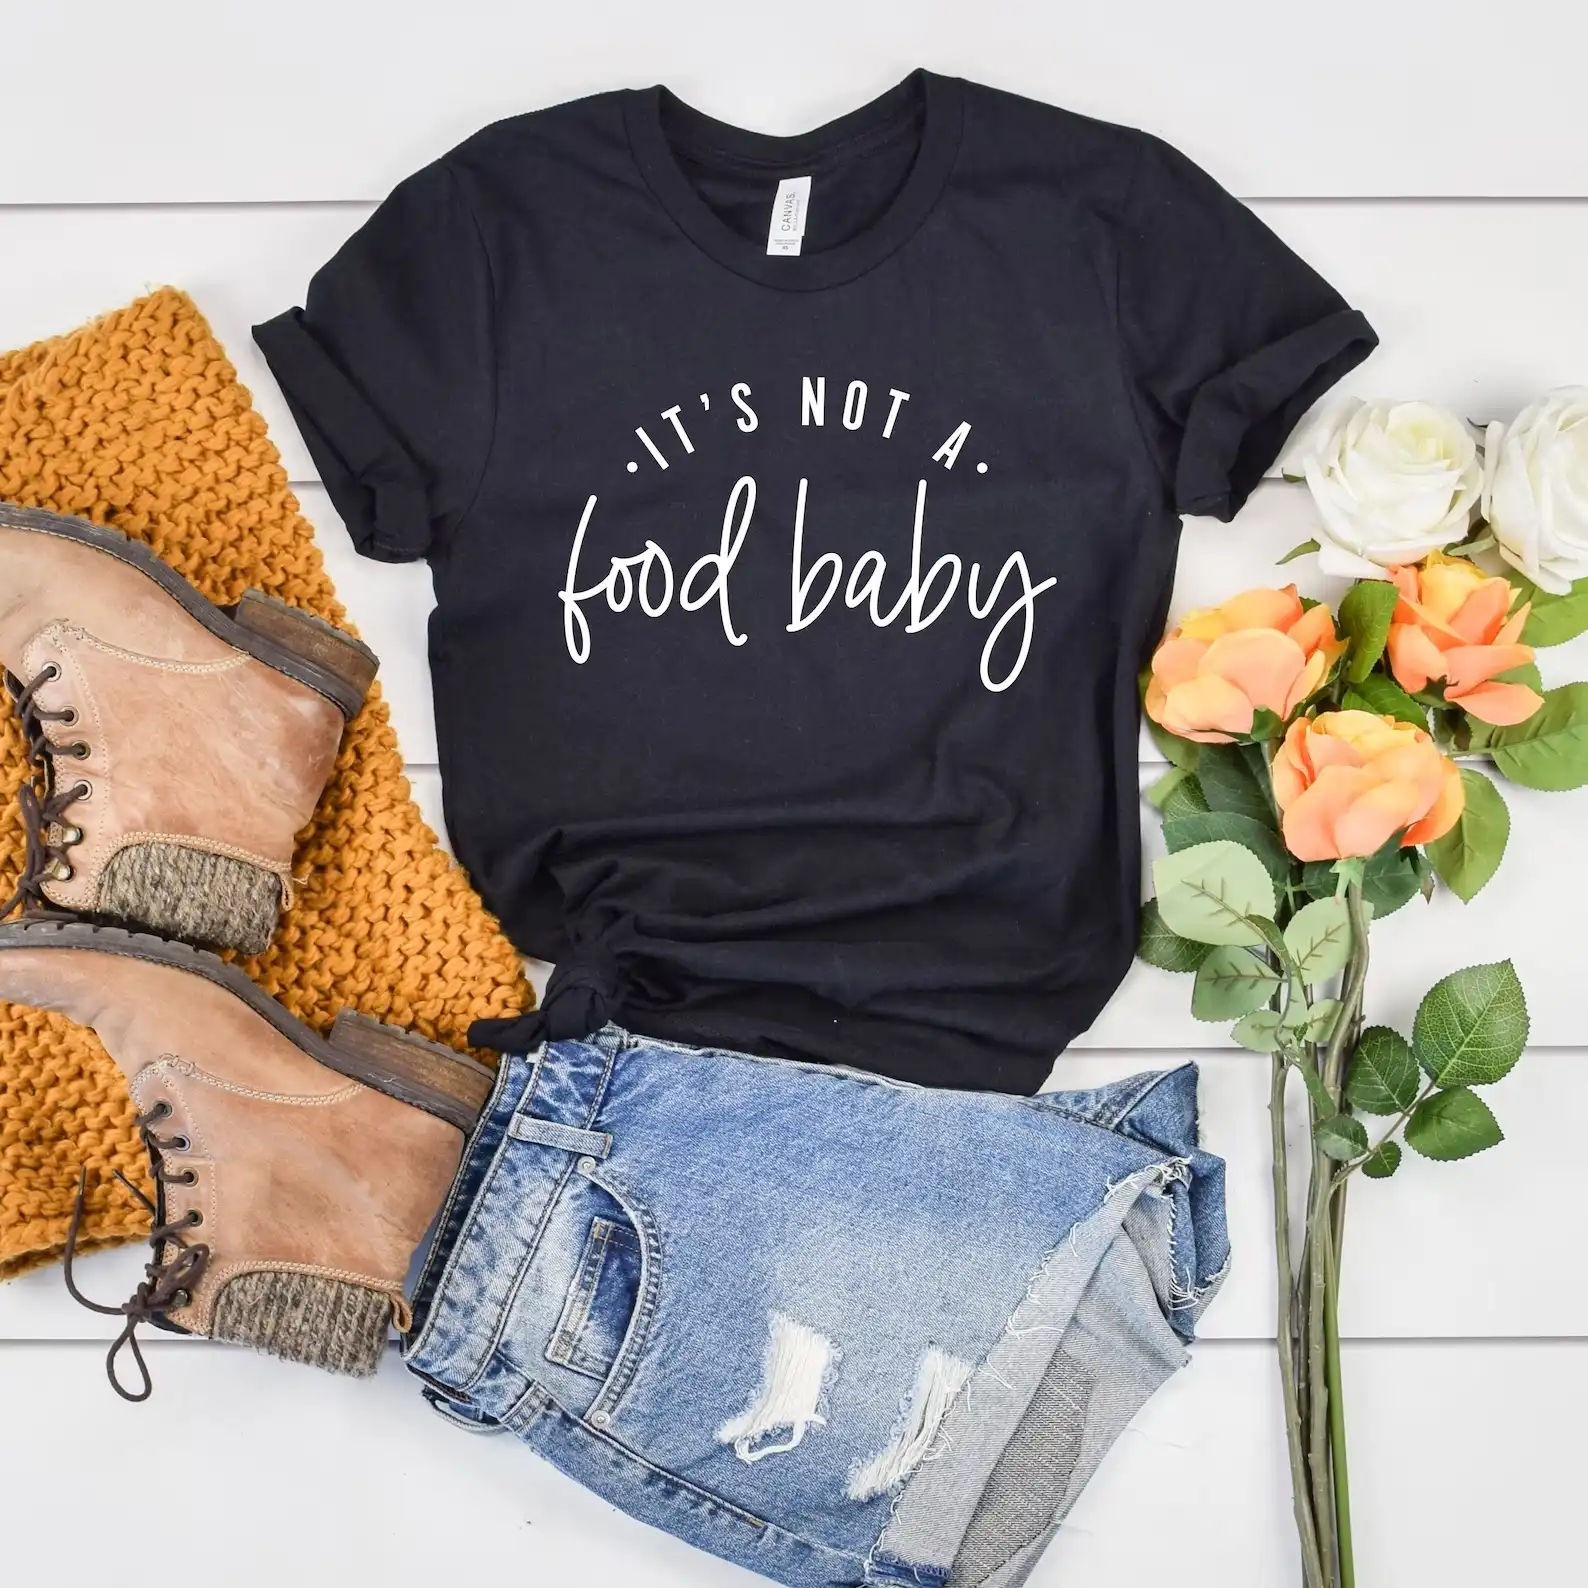 It's Not a Food Baby T-shirt